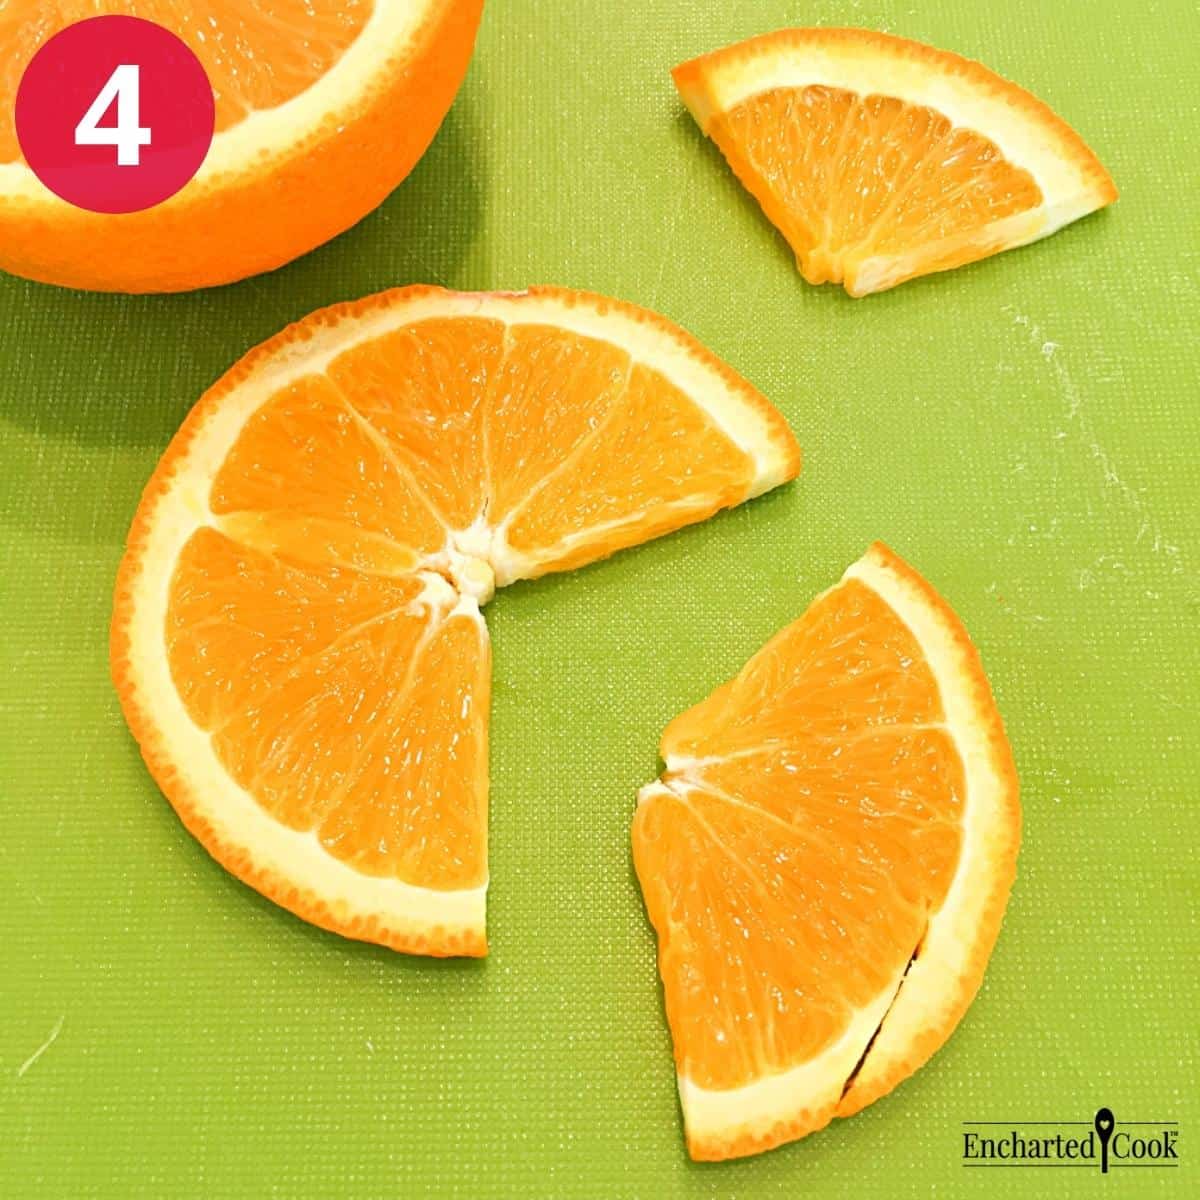 Process Photo 4 - How to cut a slice of orange that will perch on the edge of a glass.